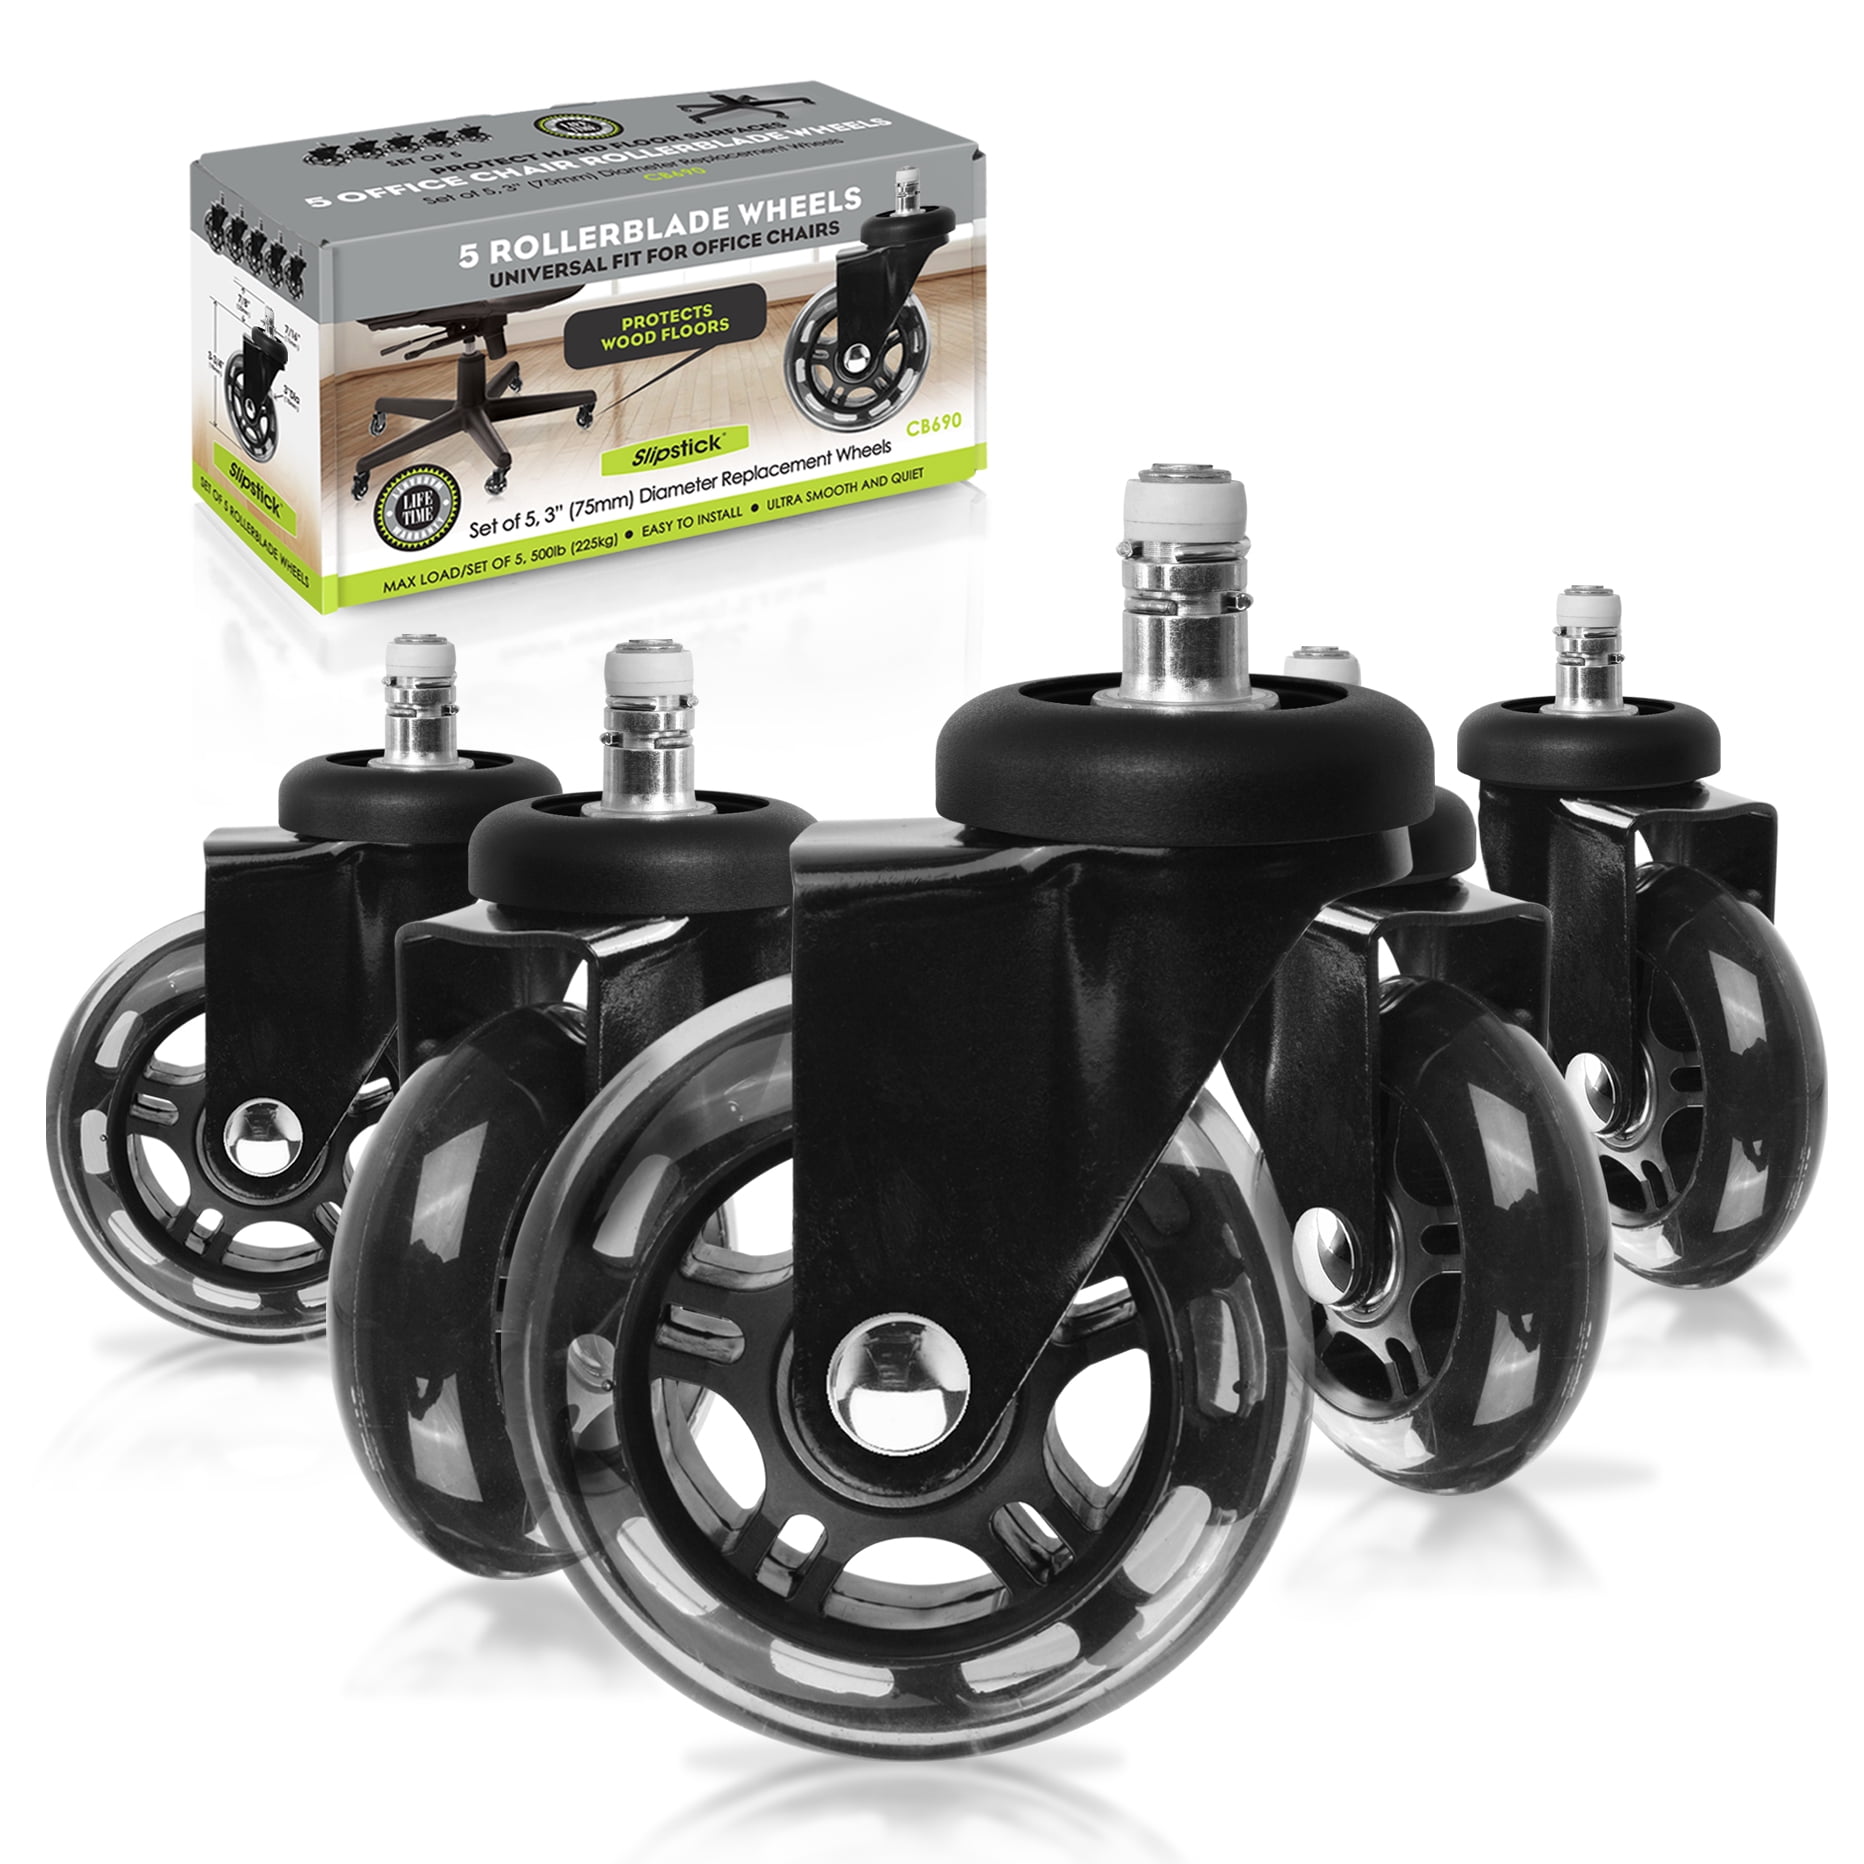 Rollerblade Soft Wheel Casters With Ball Bearing Axle For Office Chair 5pc Set 